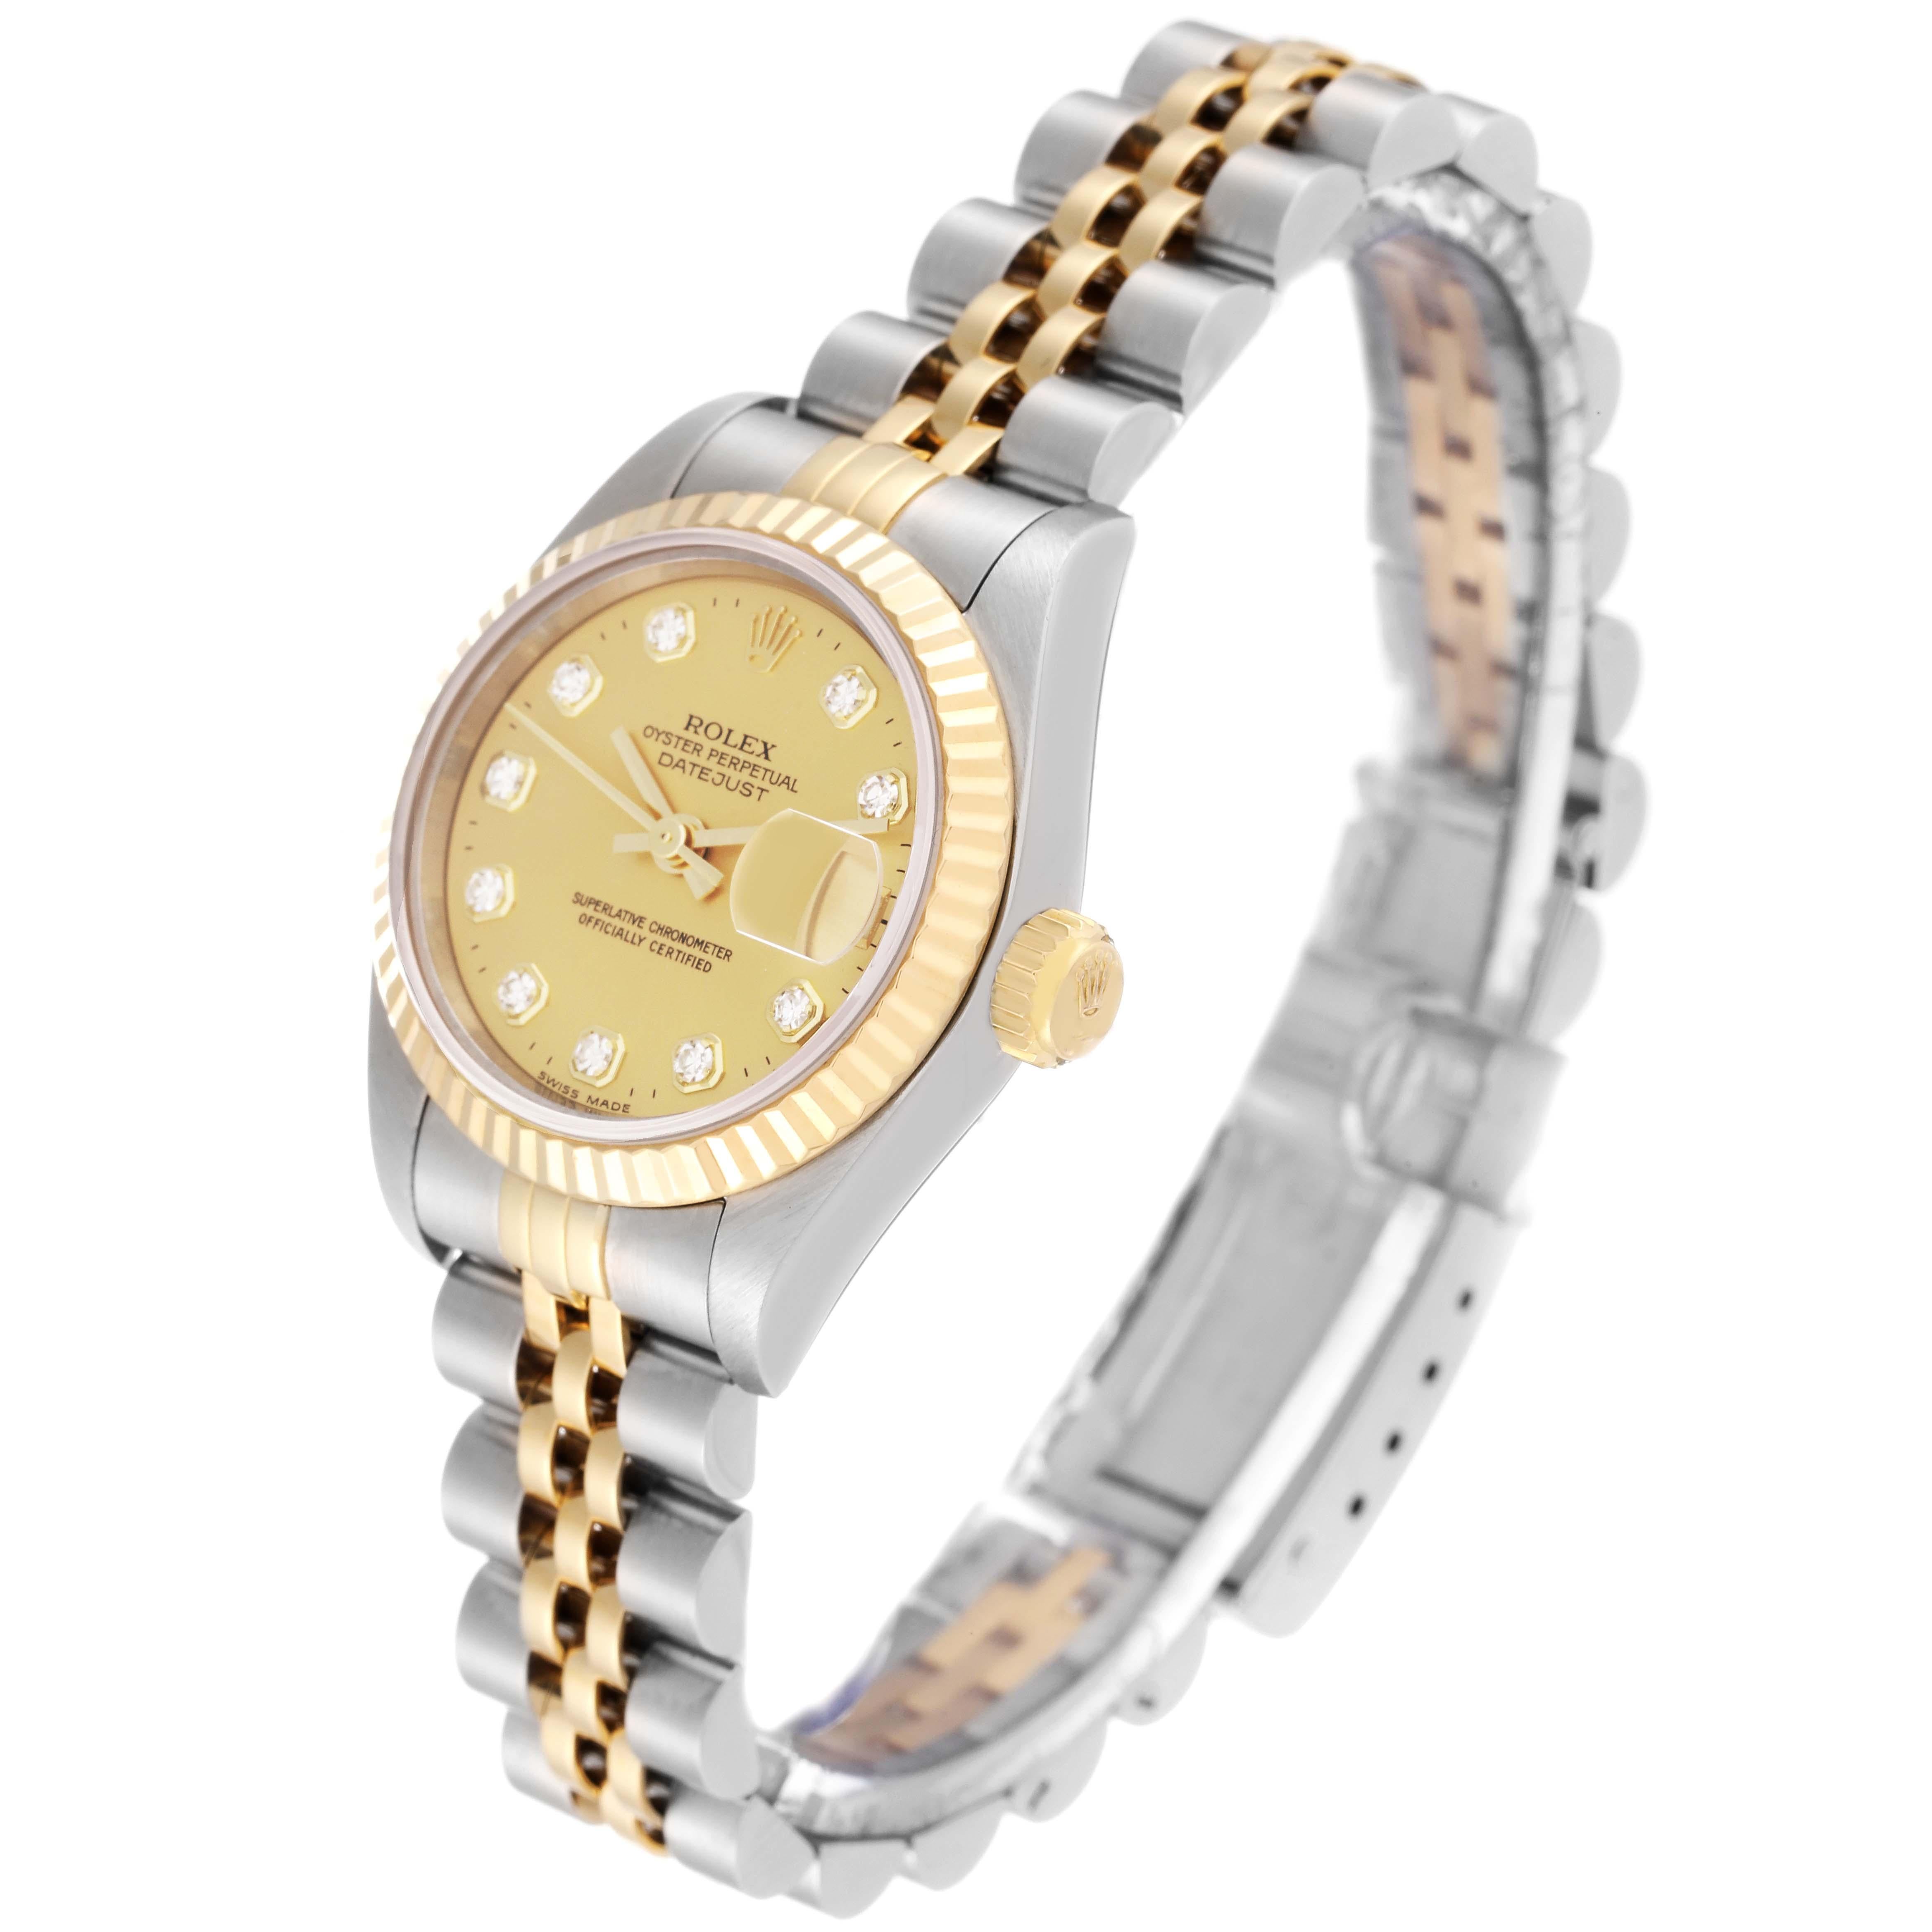 Women's Rolex Datejust Steel Yellow Gold Diamond Dial Ladies Watch 69173 Box Papers